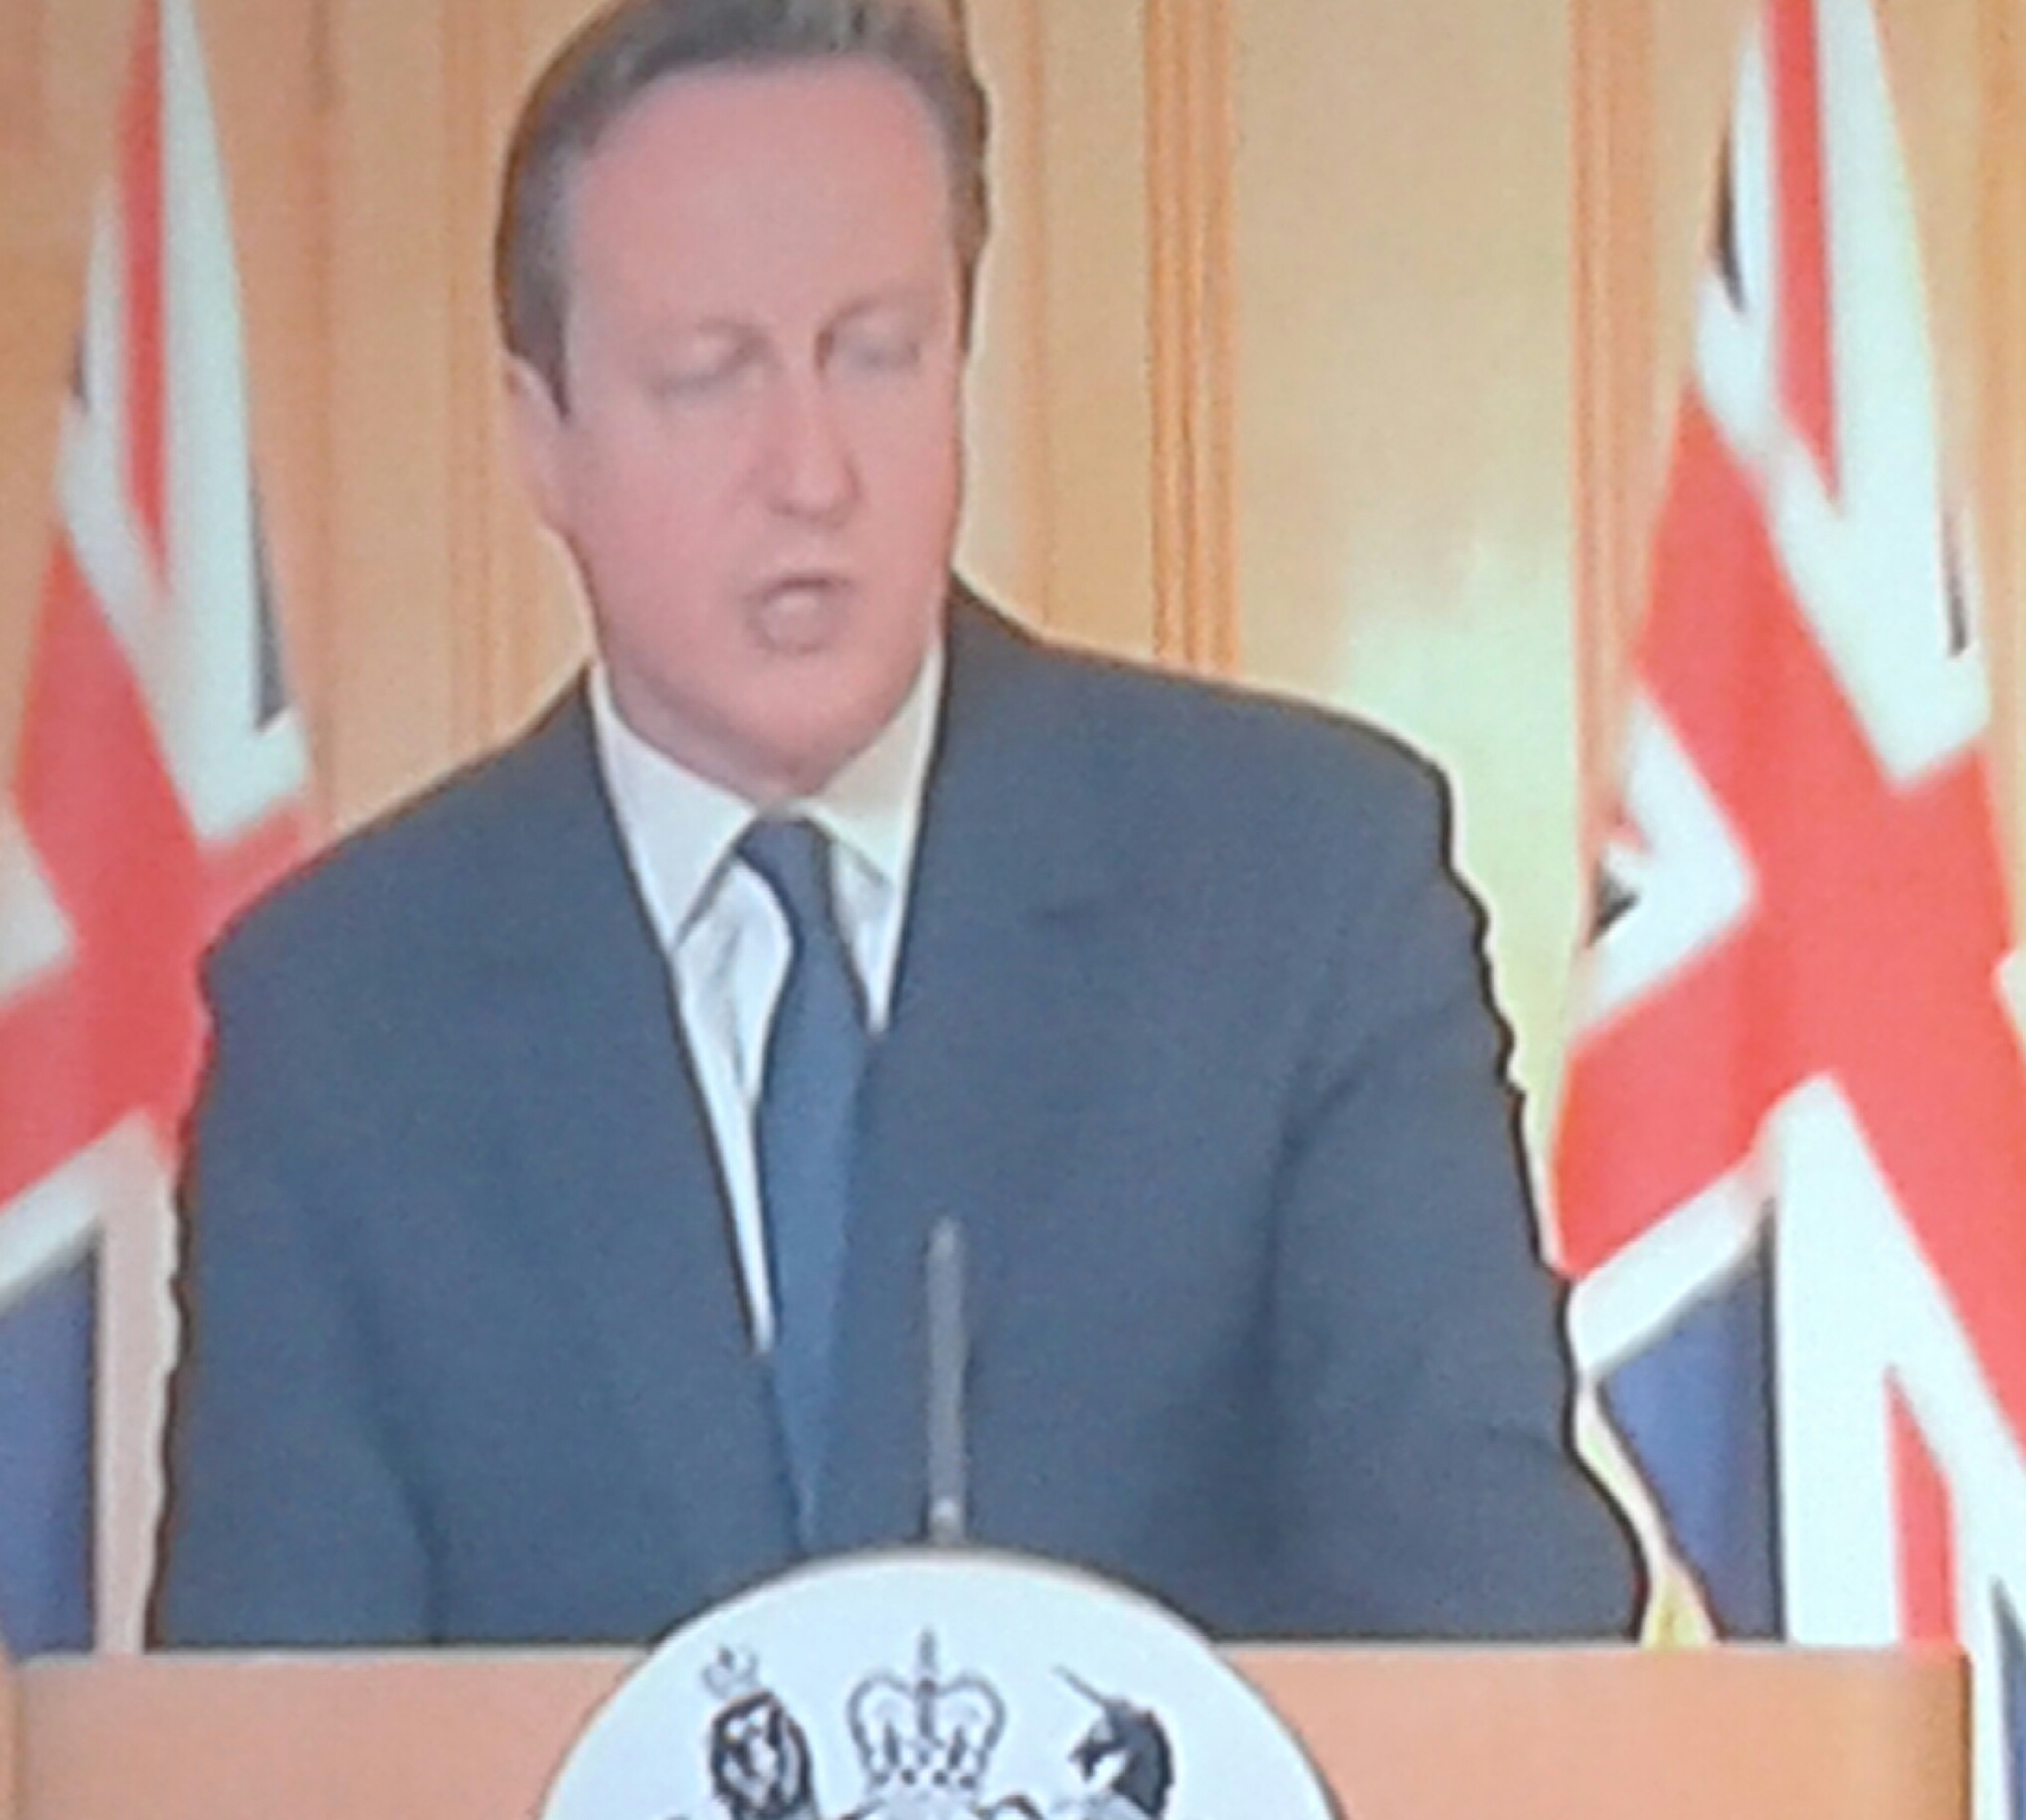 David Cameron talks about the tragedy in Sousse.